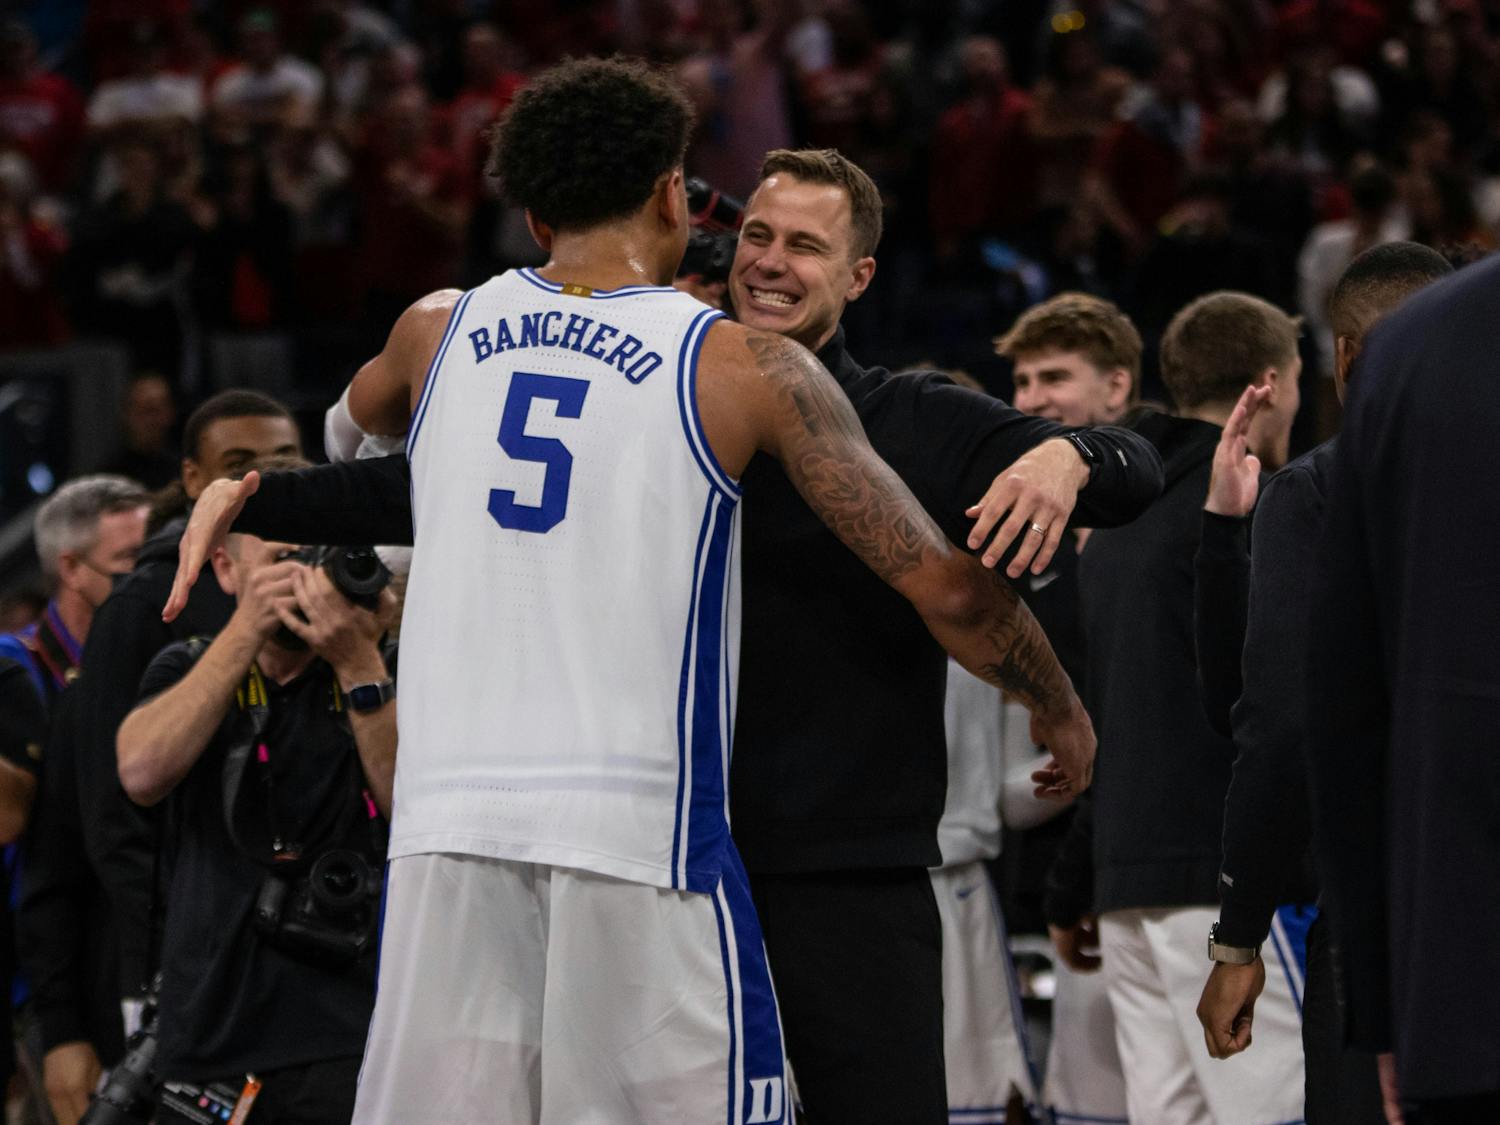 Saturday's Final Four matchup starts the next chapter of the rivalry, one with new faces at the helm in Duke head coach-in-waiting Jon Scheyer and North Carolina head coach Hubert Davis.